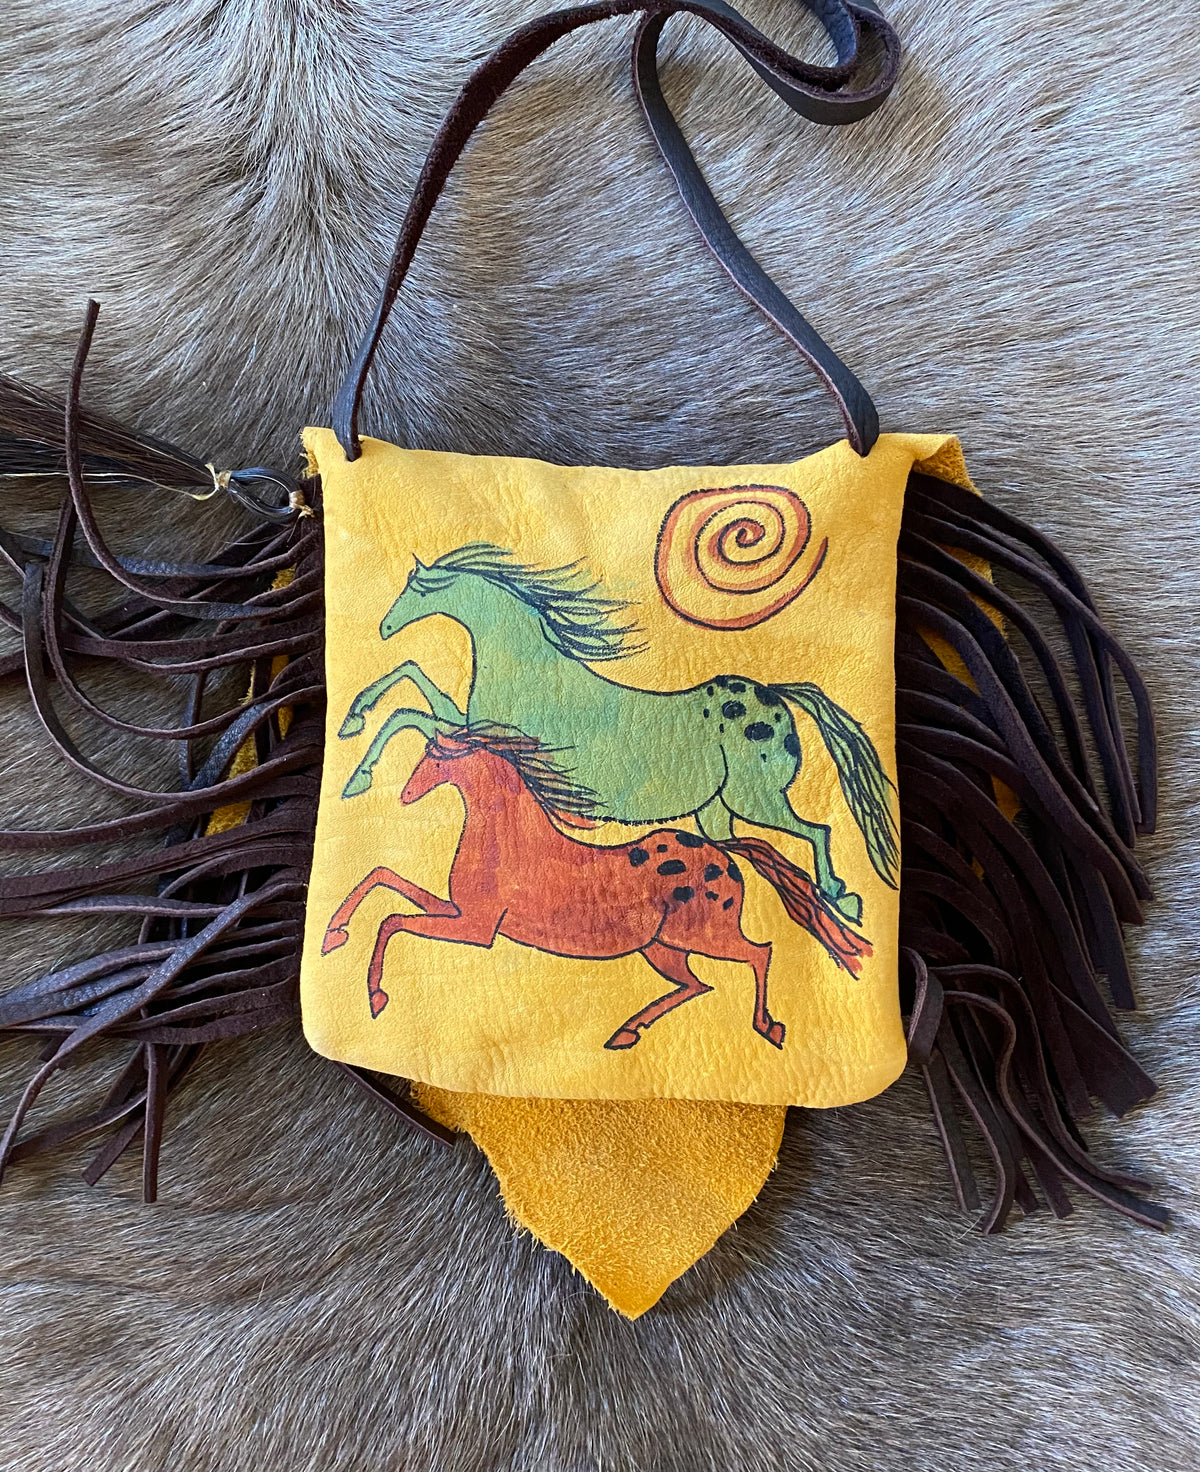 Elk Possibles Bag with Sun Bonnet Shield and Buffalo